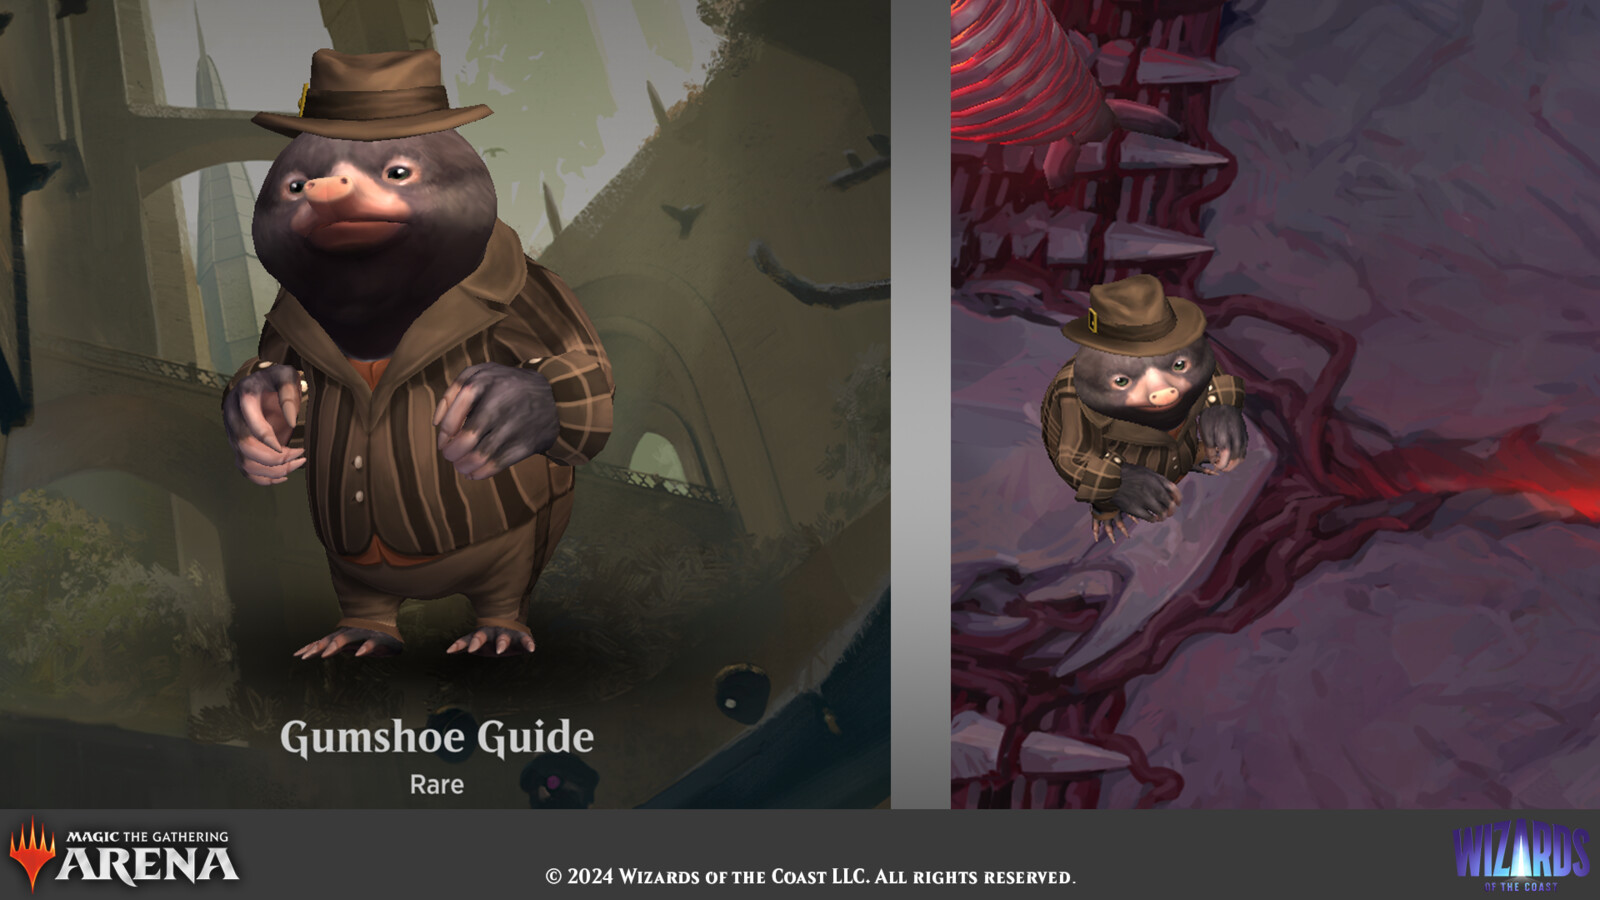 Select companion and game views for the Gumshoe Guide Mole